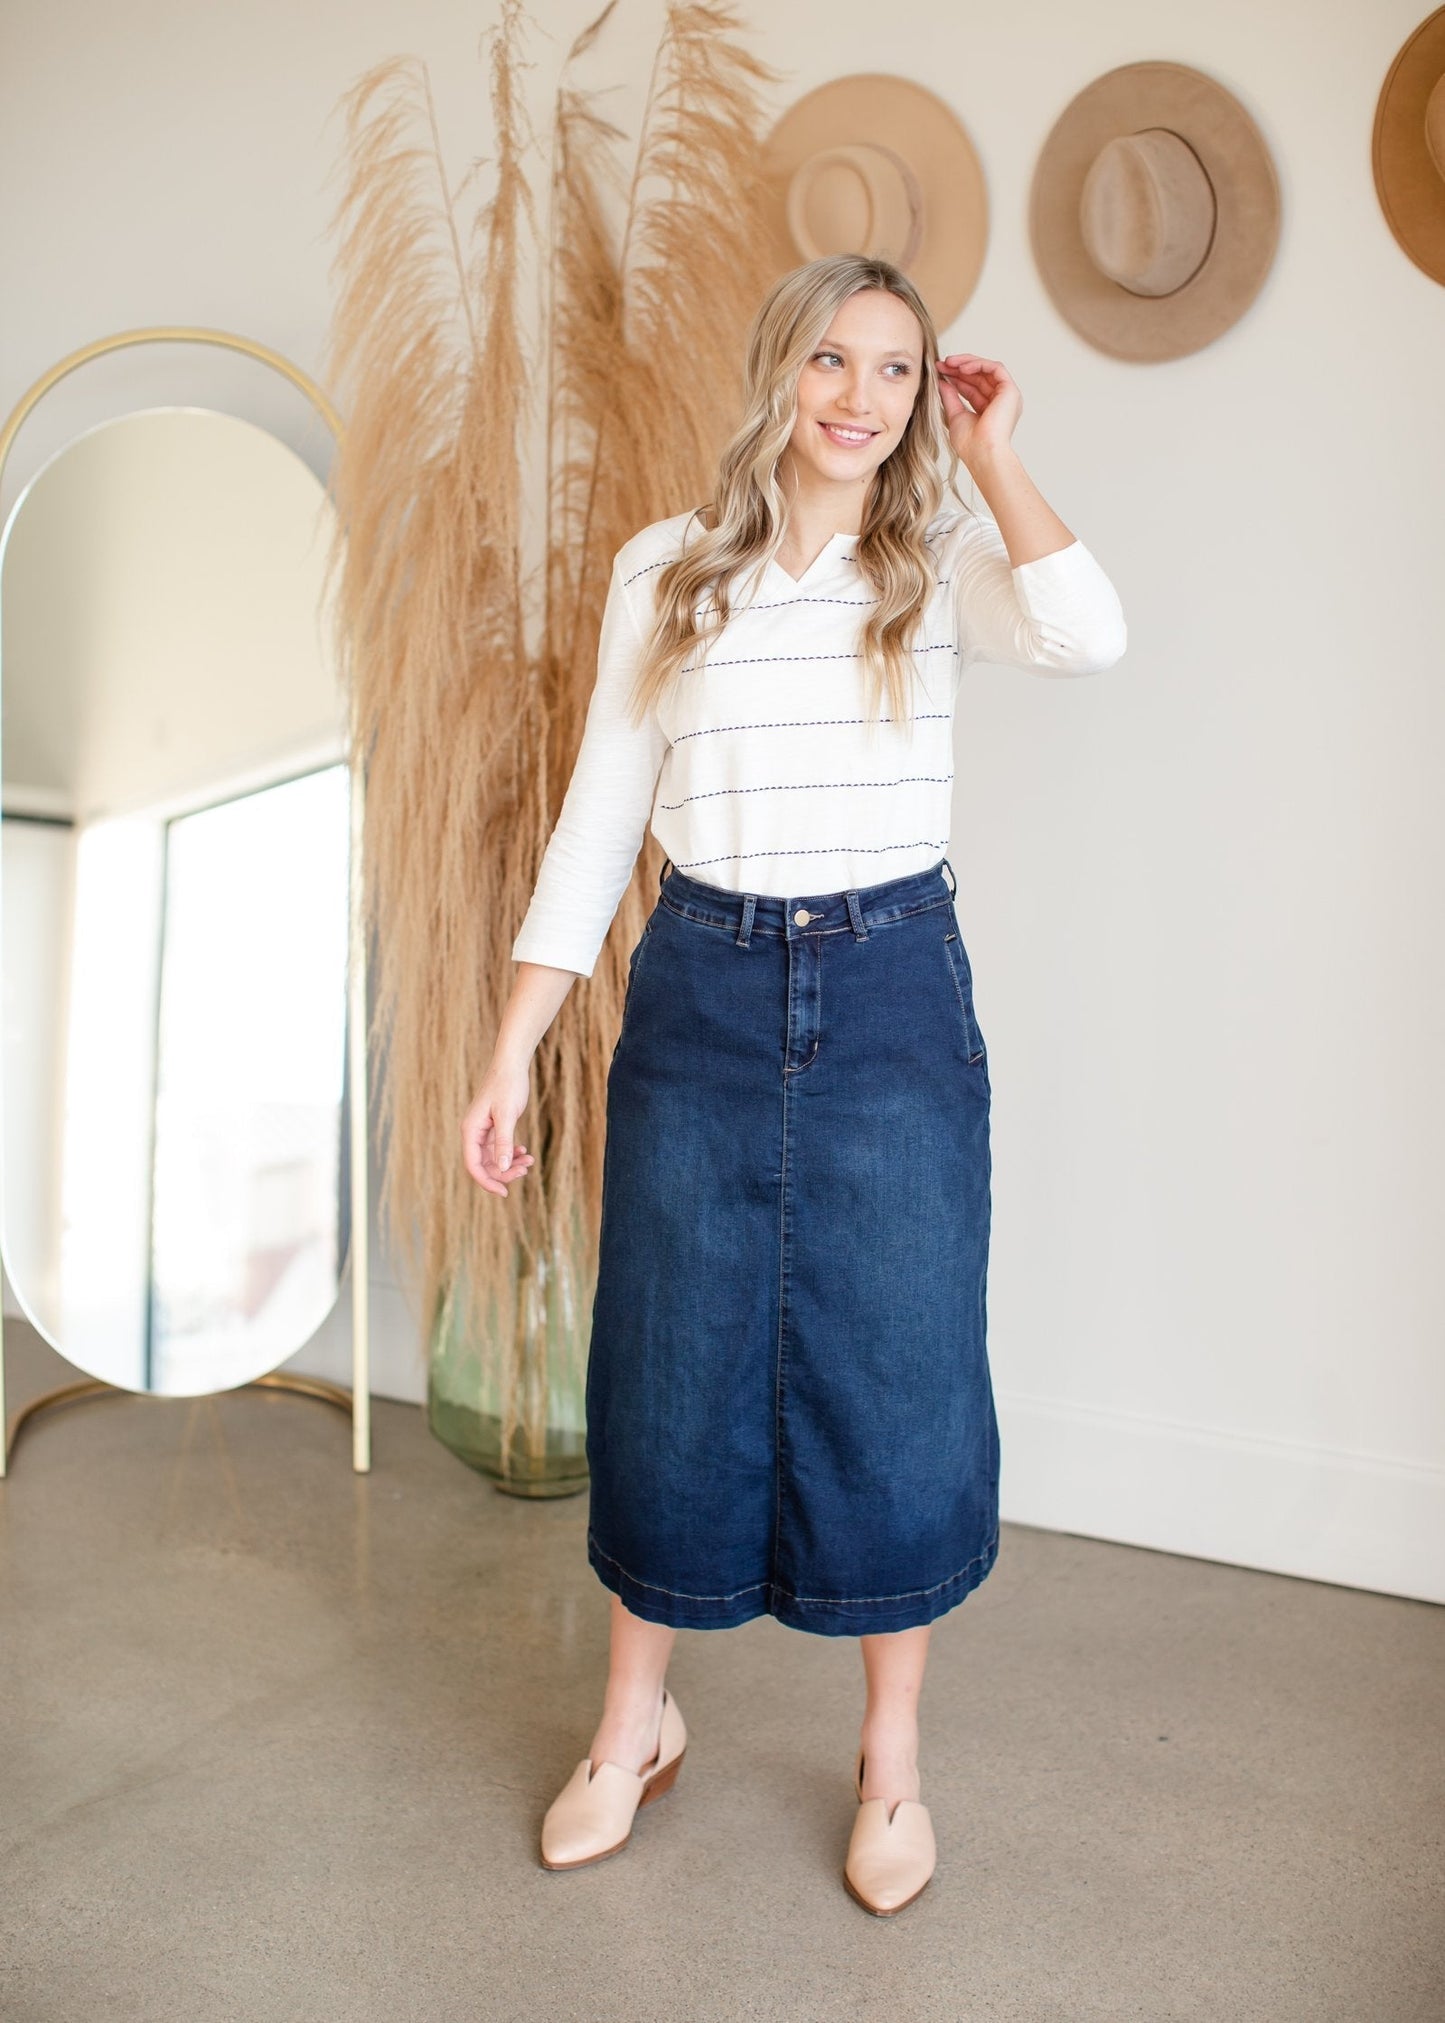 The caren skirt is an inherit design with functioning side pockets and is a slight a-line denim skirt. It has matte gold buttons on the back for added detail.